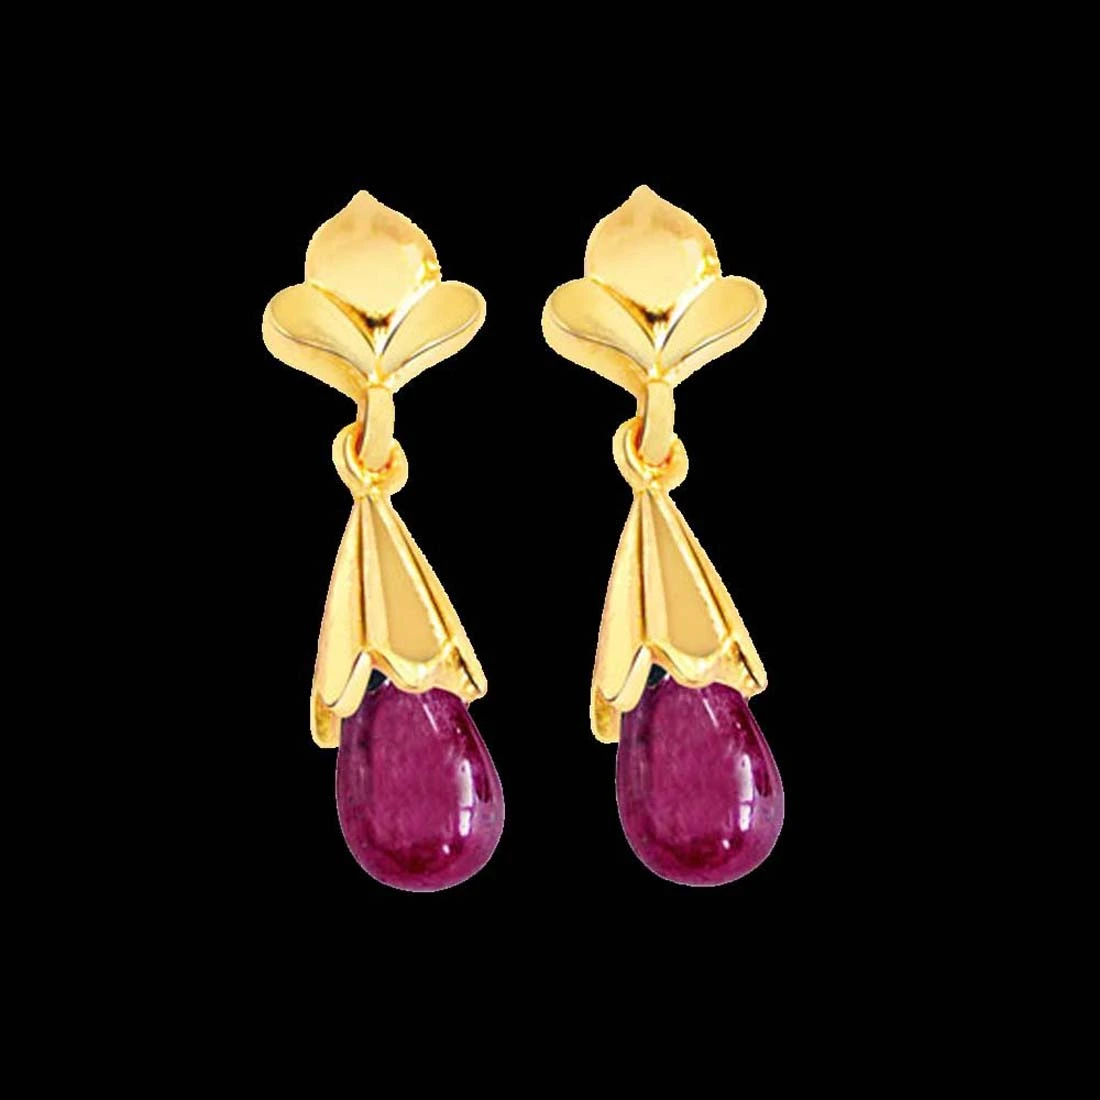 My Love Is True - Real Drop Ruby & Gold Plated Silver Hanging Earrings for Women (RBER3)